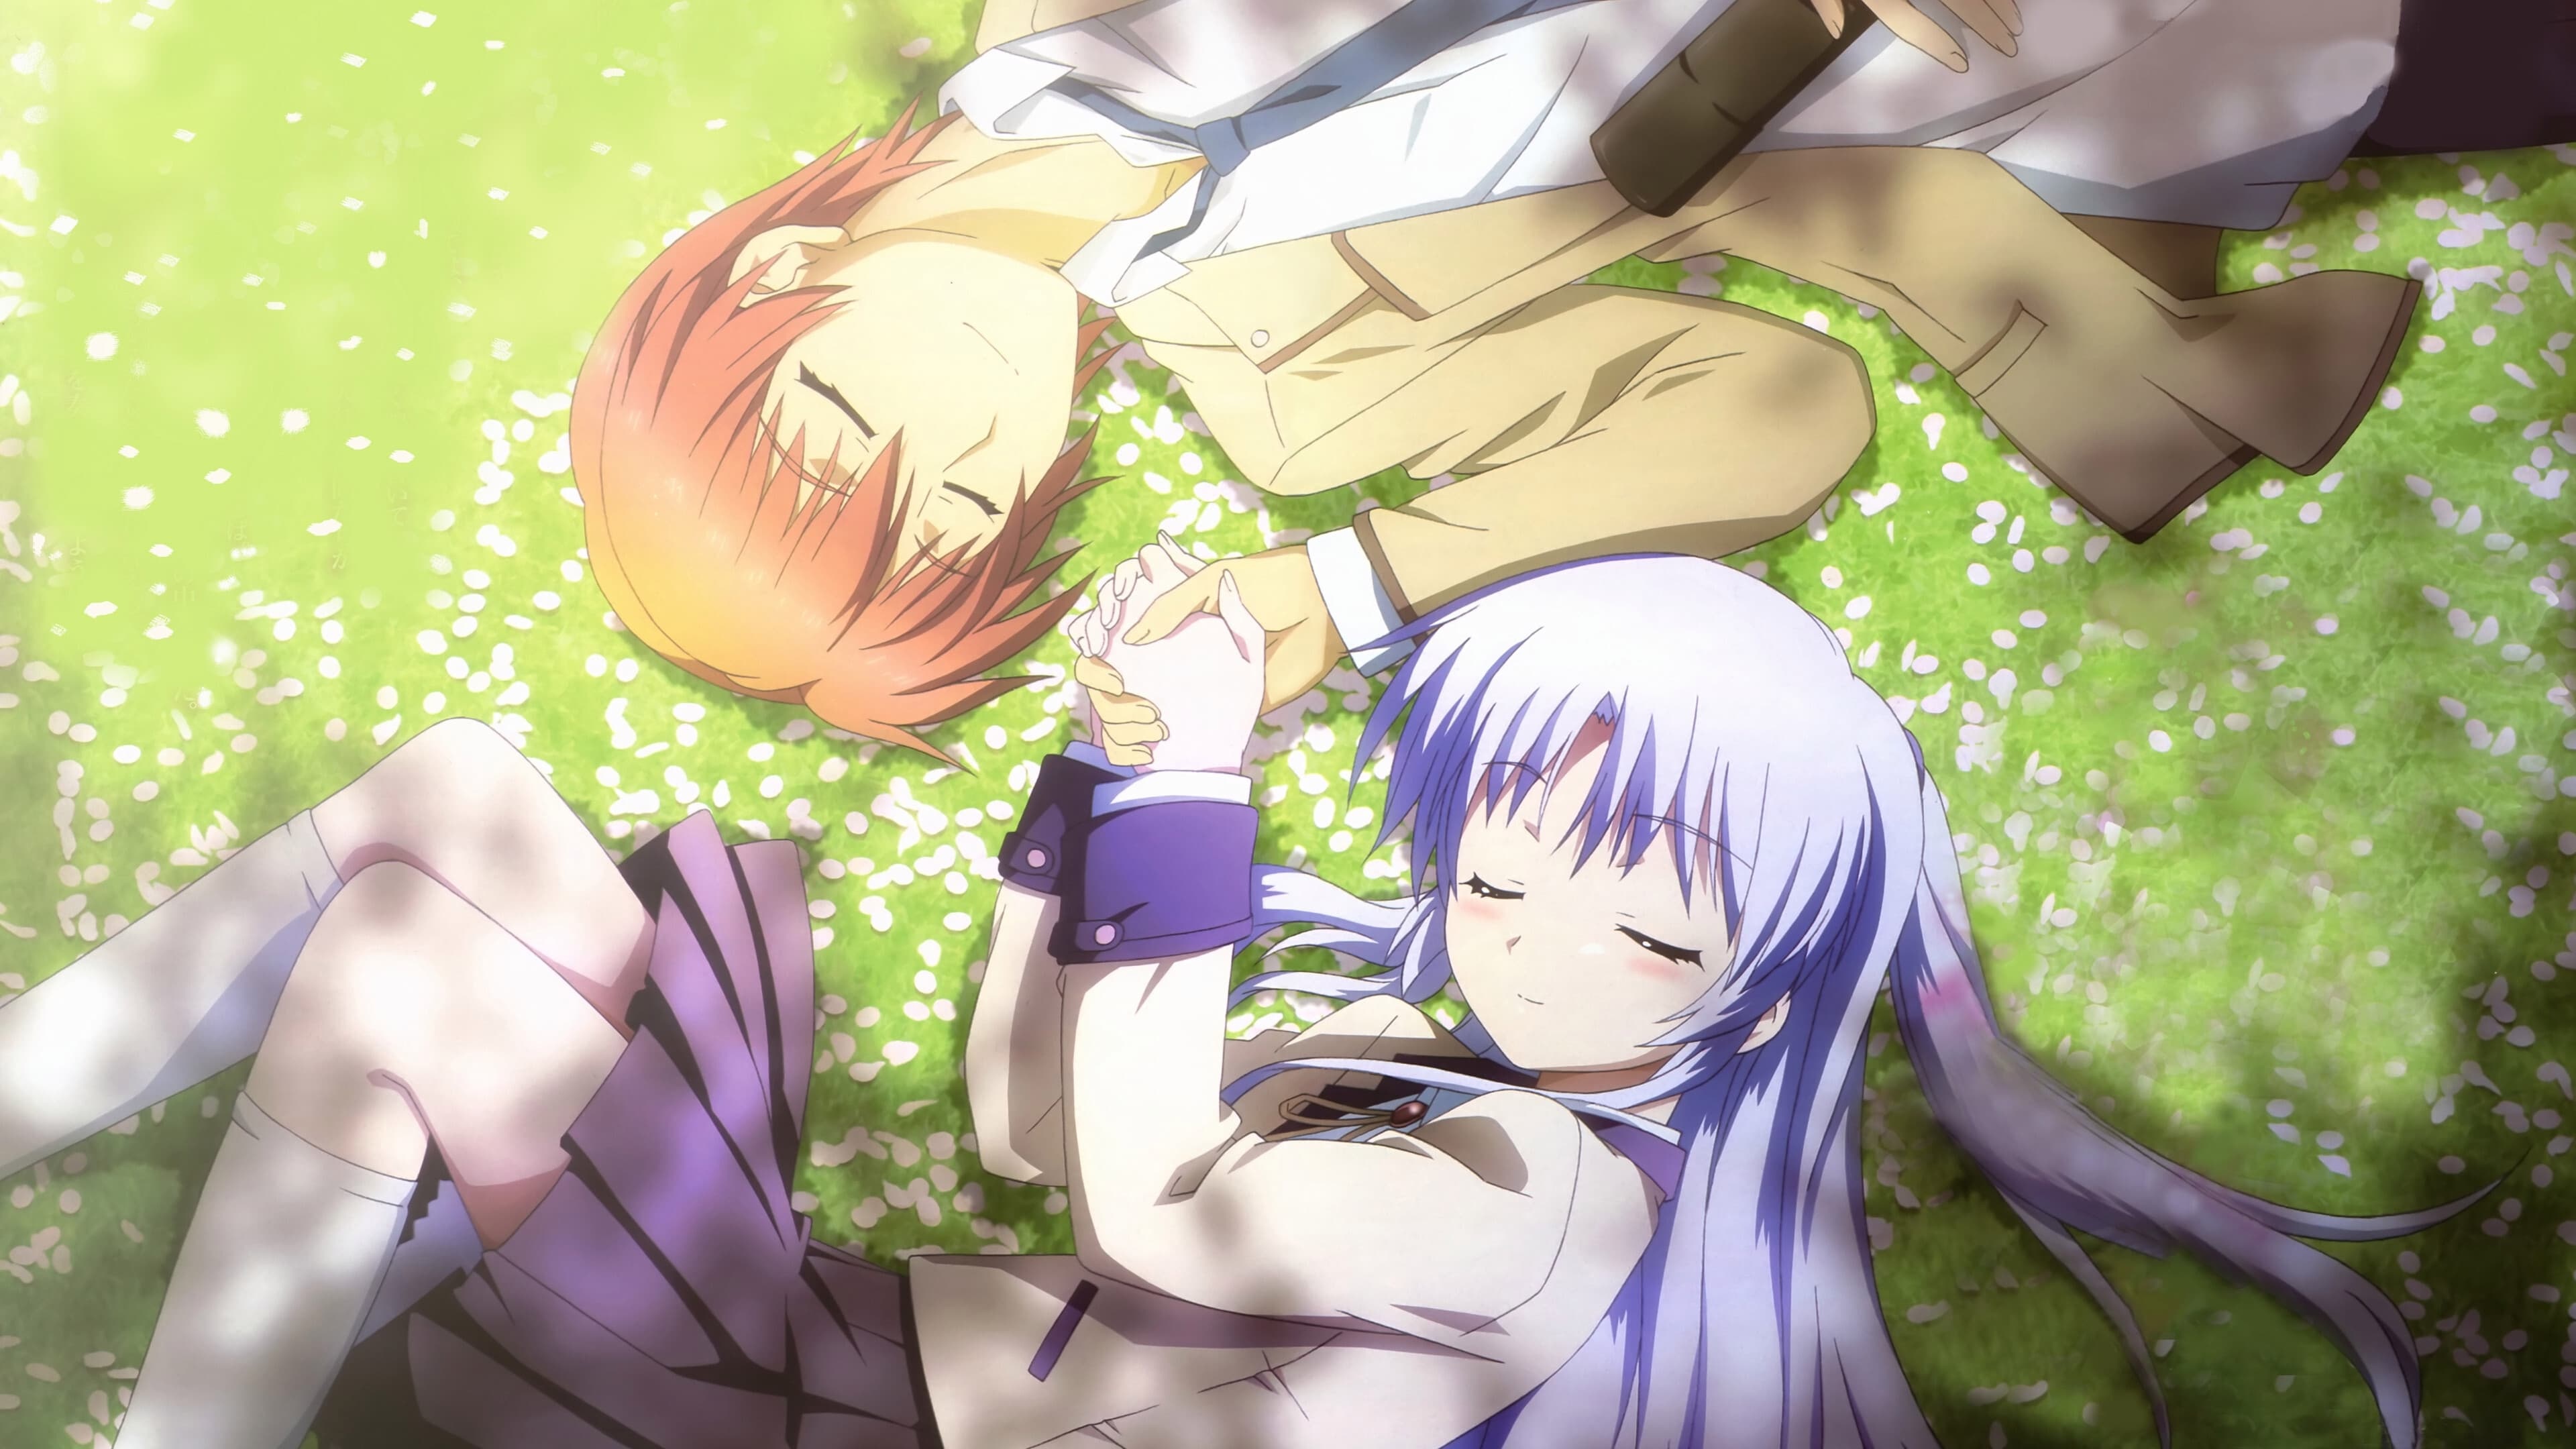 Angel Beats! (Anime): TV Series 2010-2010, Students of the Afterlife school. 3840x2160 4K Wallpaper.